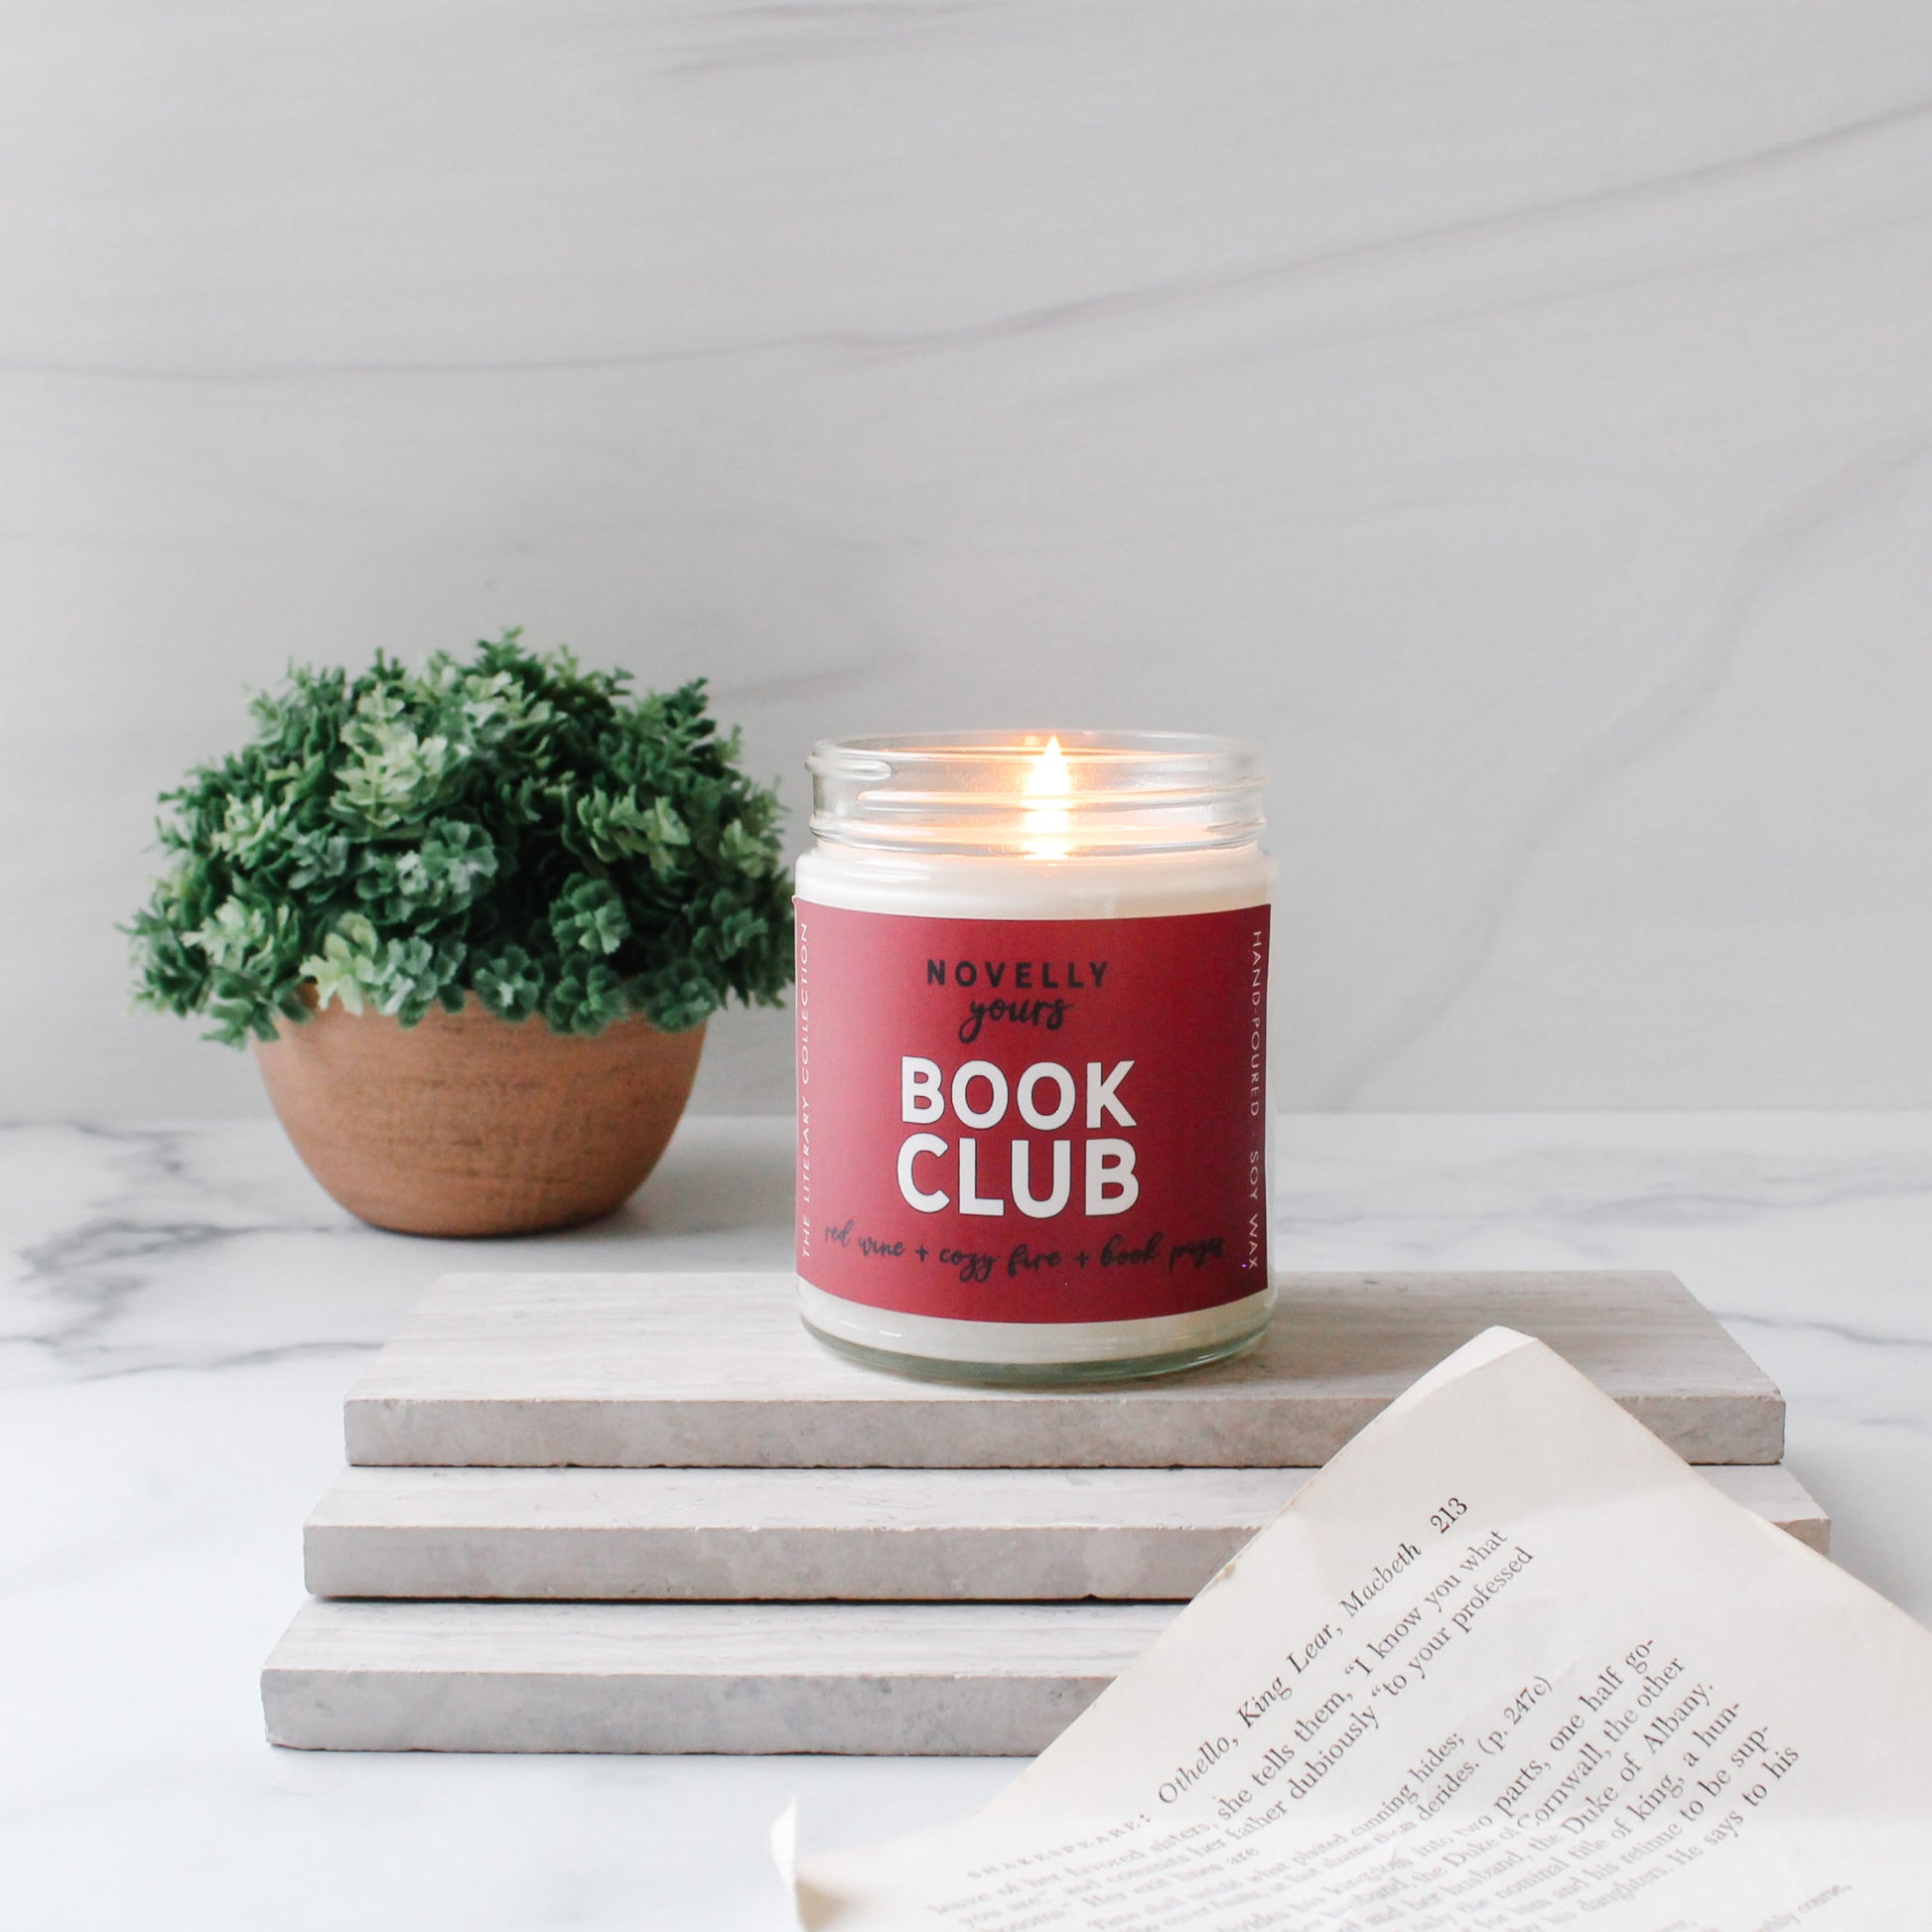 book club scented soy wax candle with fruit & fire scents with red label